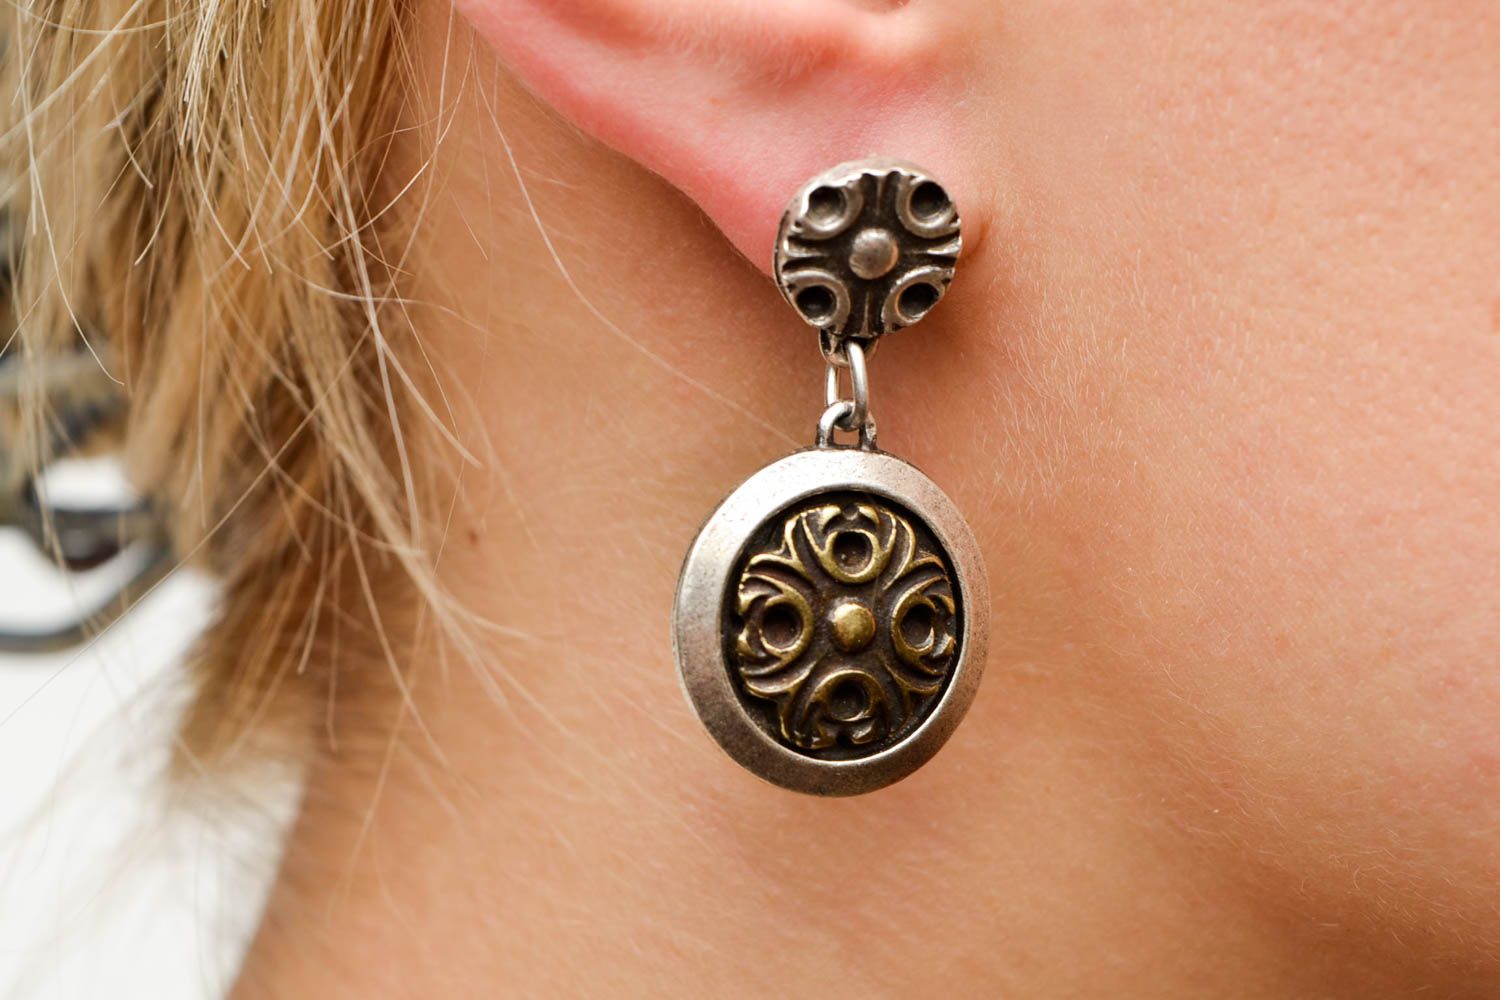 Unusual handmade metal earrings ideas costume jewelry designs gifts for her photo 2